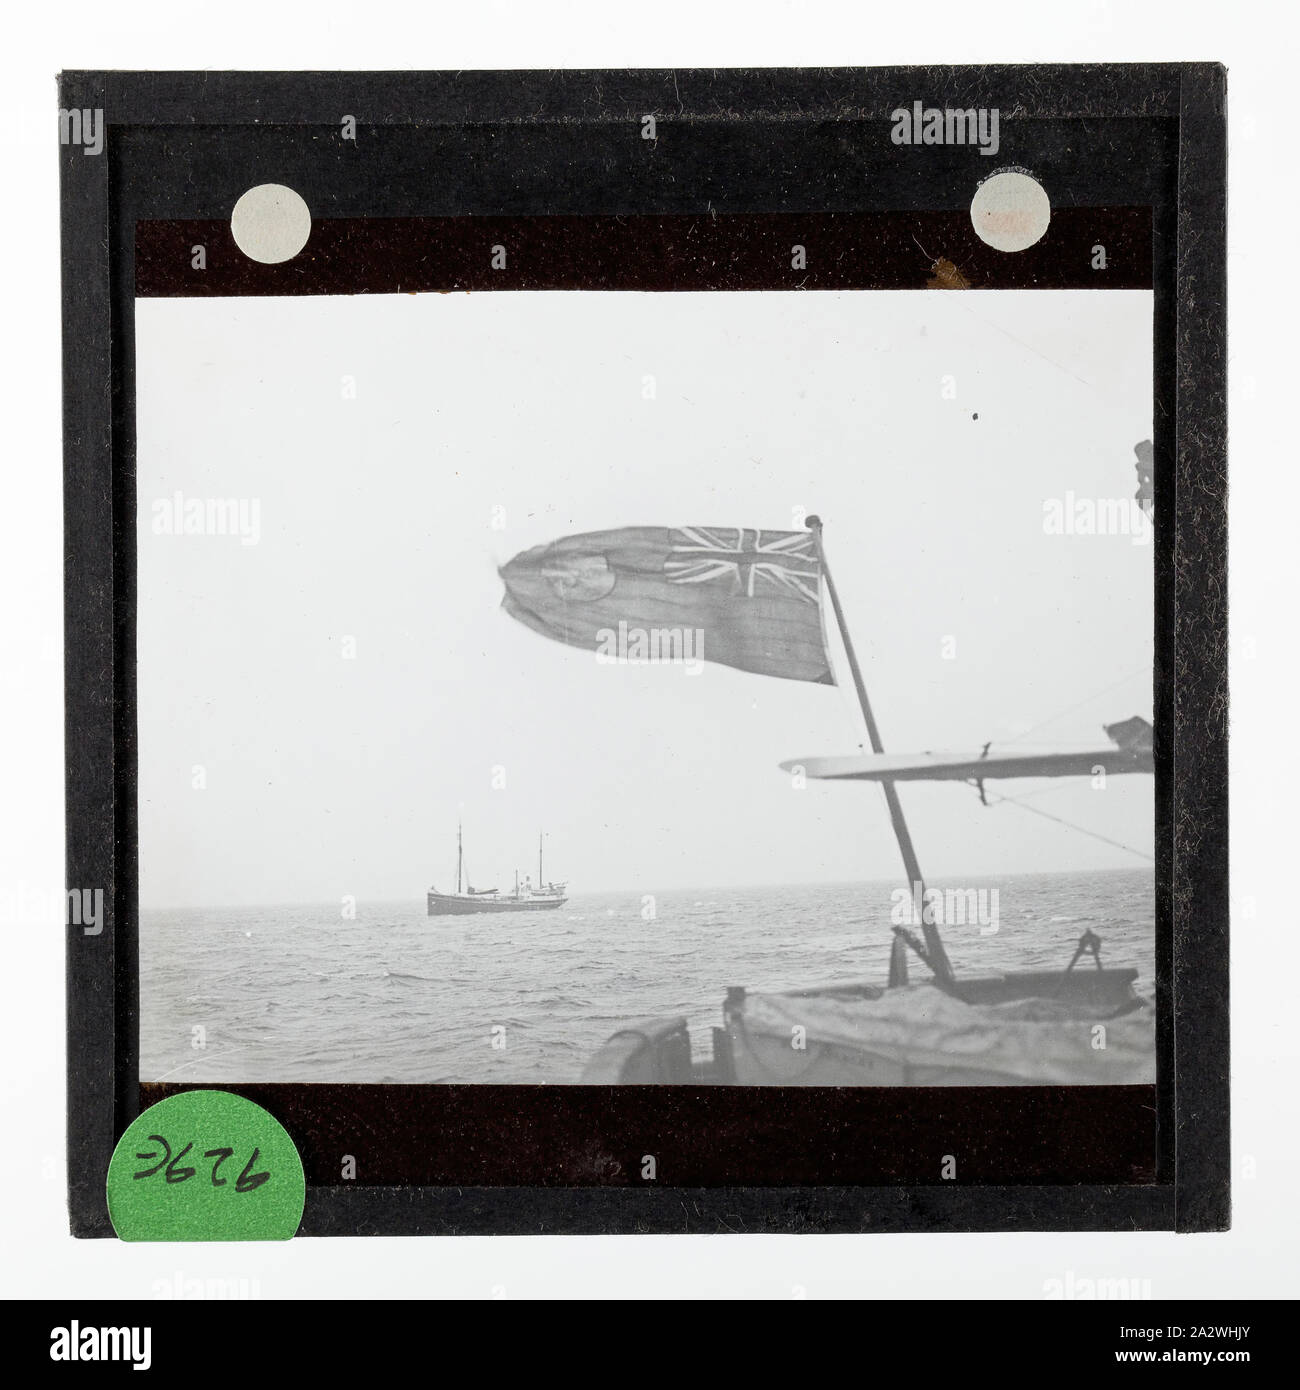 Lantern Slide - Discovery II & the Wyatt Earp, Bay Of Whales, Ellsworth Relief Expedition, Antarctica, 20 Jan 1936, Lantern slide of Discovery II & the Wyatt Earp, Bay Of Whales, Ellsworth Relief Expedition, Antarctica. One of 328 images in various formats including artworks, photographs, glass negatives and lantern slides Stock Photo